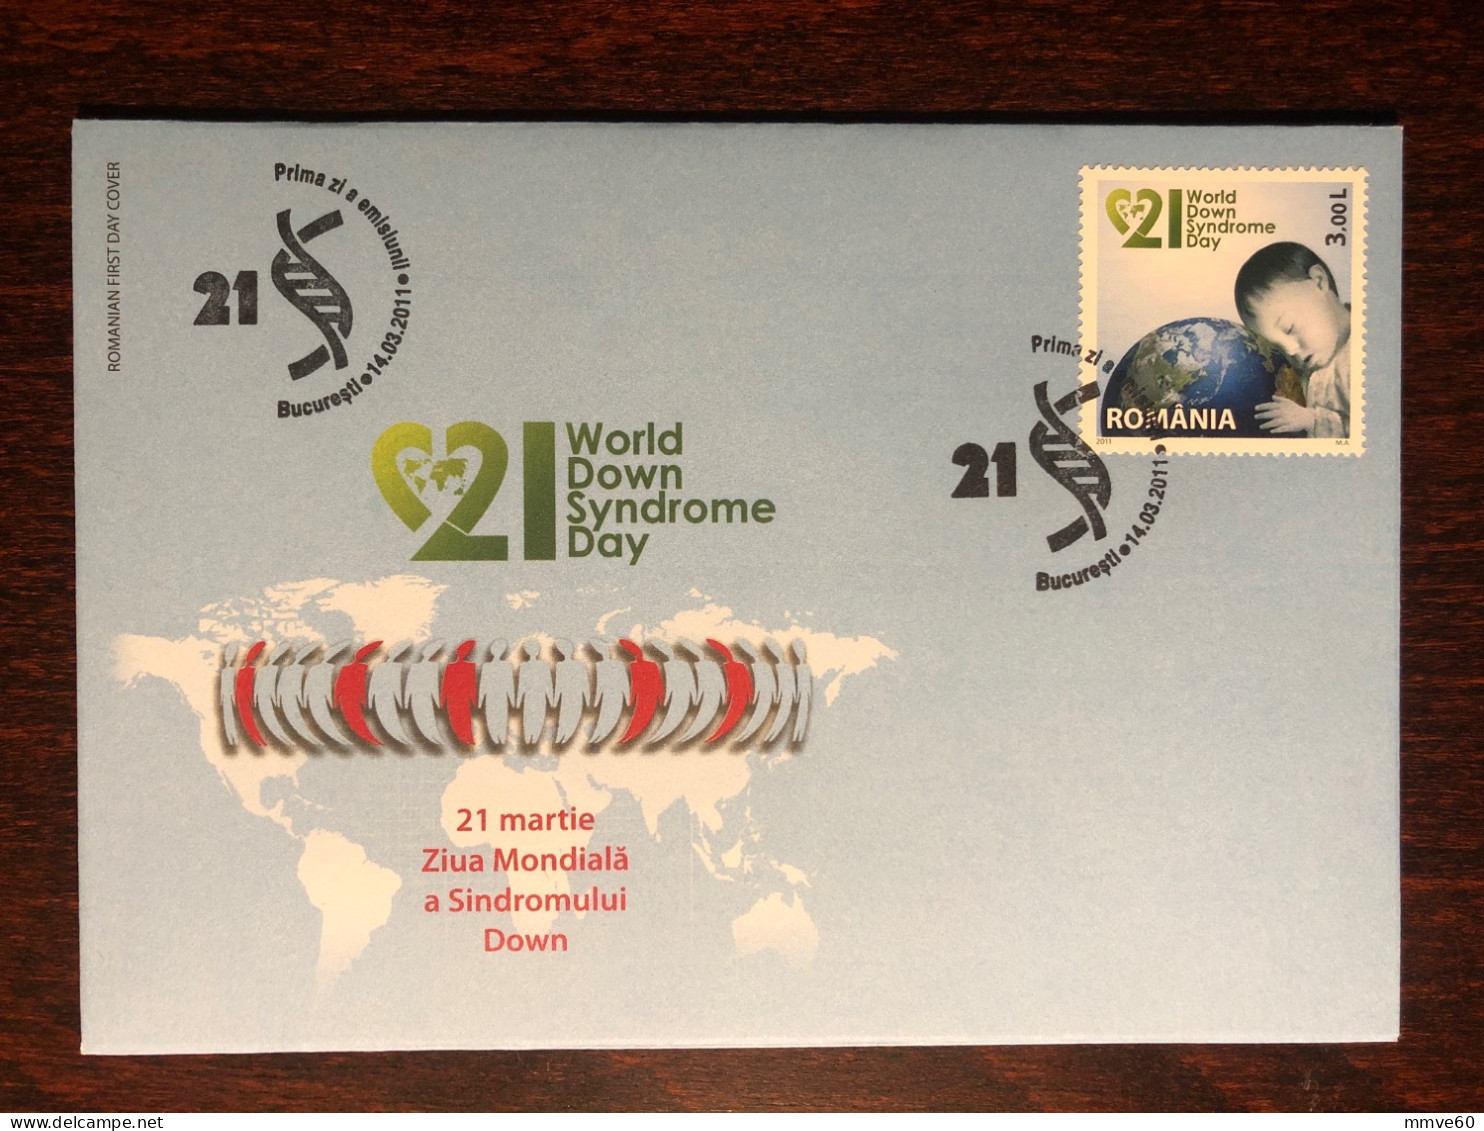 ROMANIA FDC COVER 2011 YEAR DOWN SYNDROME HEALTH MEDICINE STAMPS - FDC